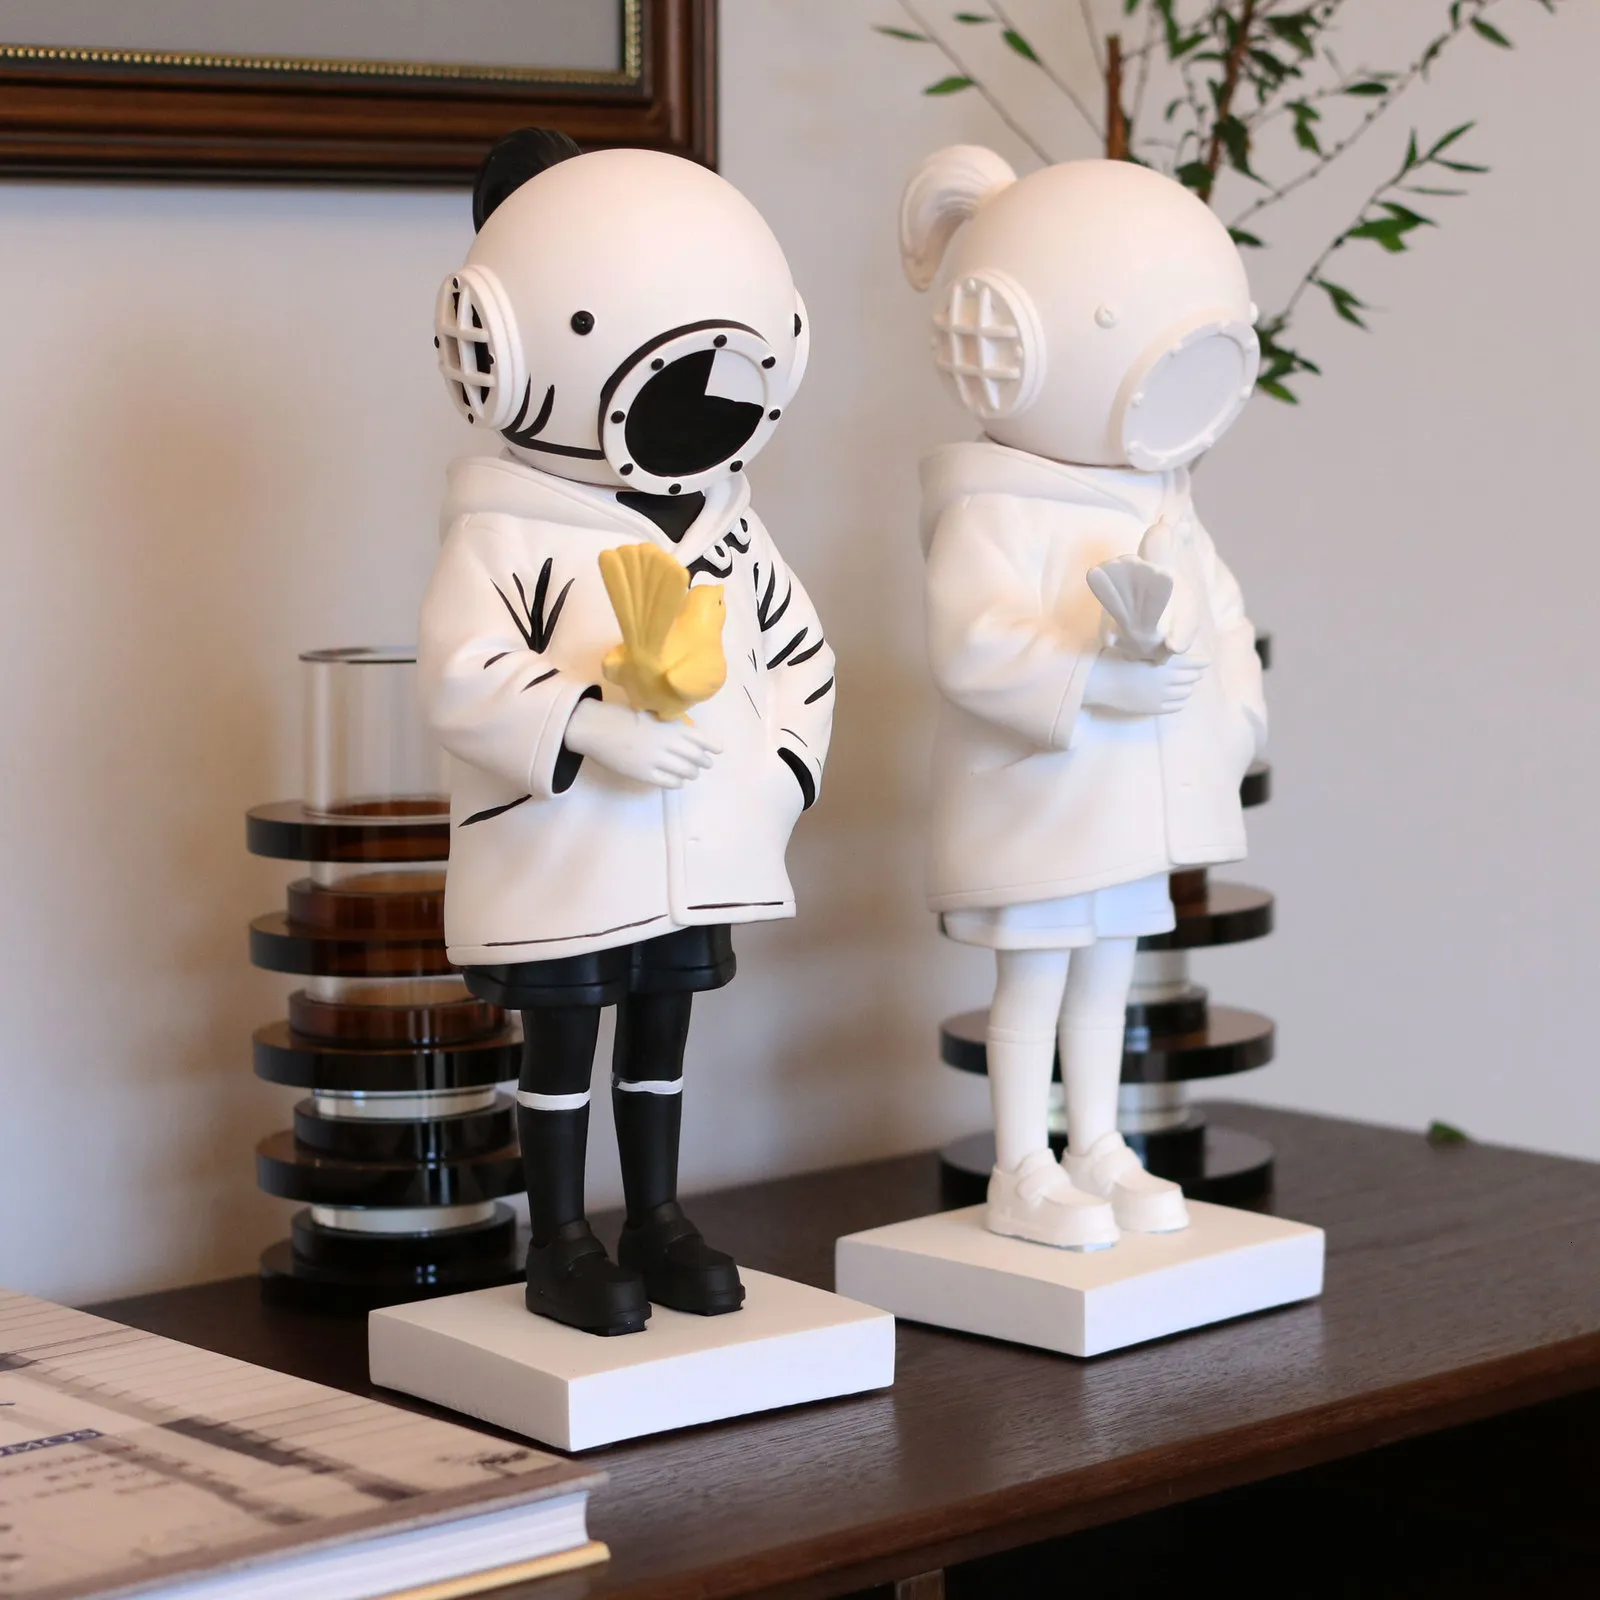 Decorative Objects Figurines Nordic Art DeepSea Diver Statues Banksy Sculpture England Street Collectible Toy Resin Girl Statue Home Decoration 230721